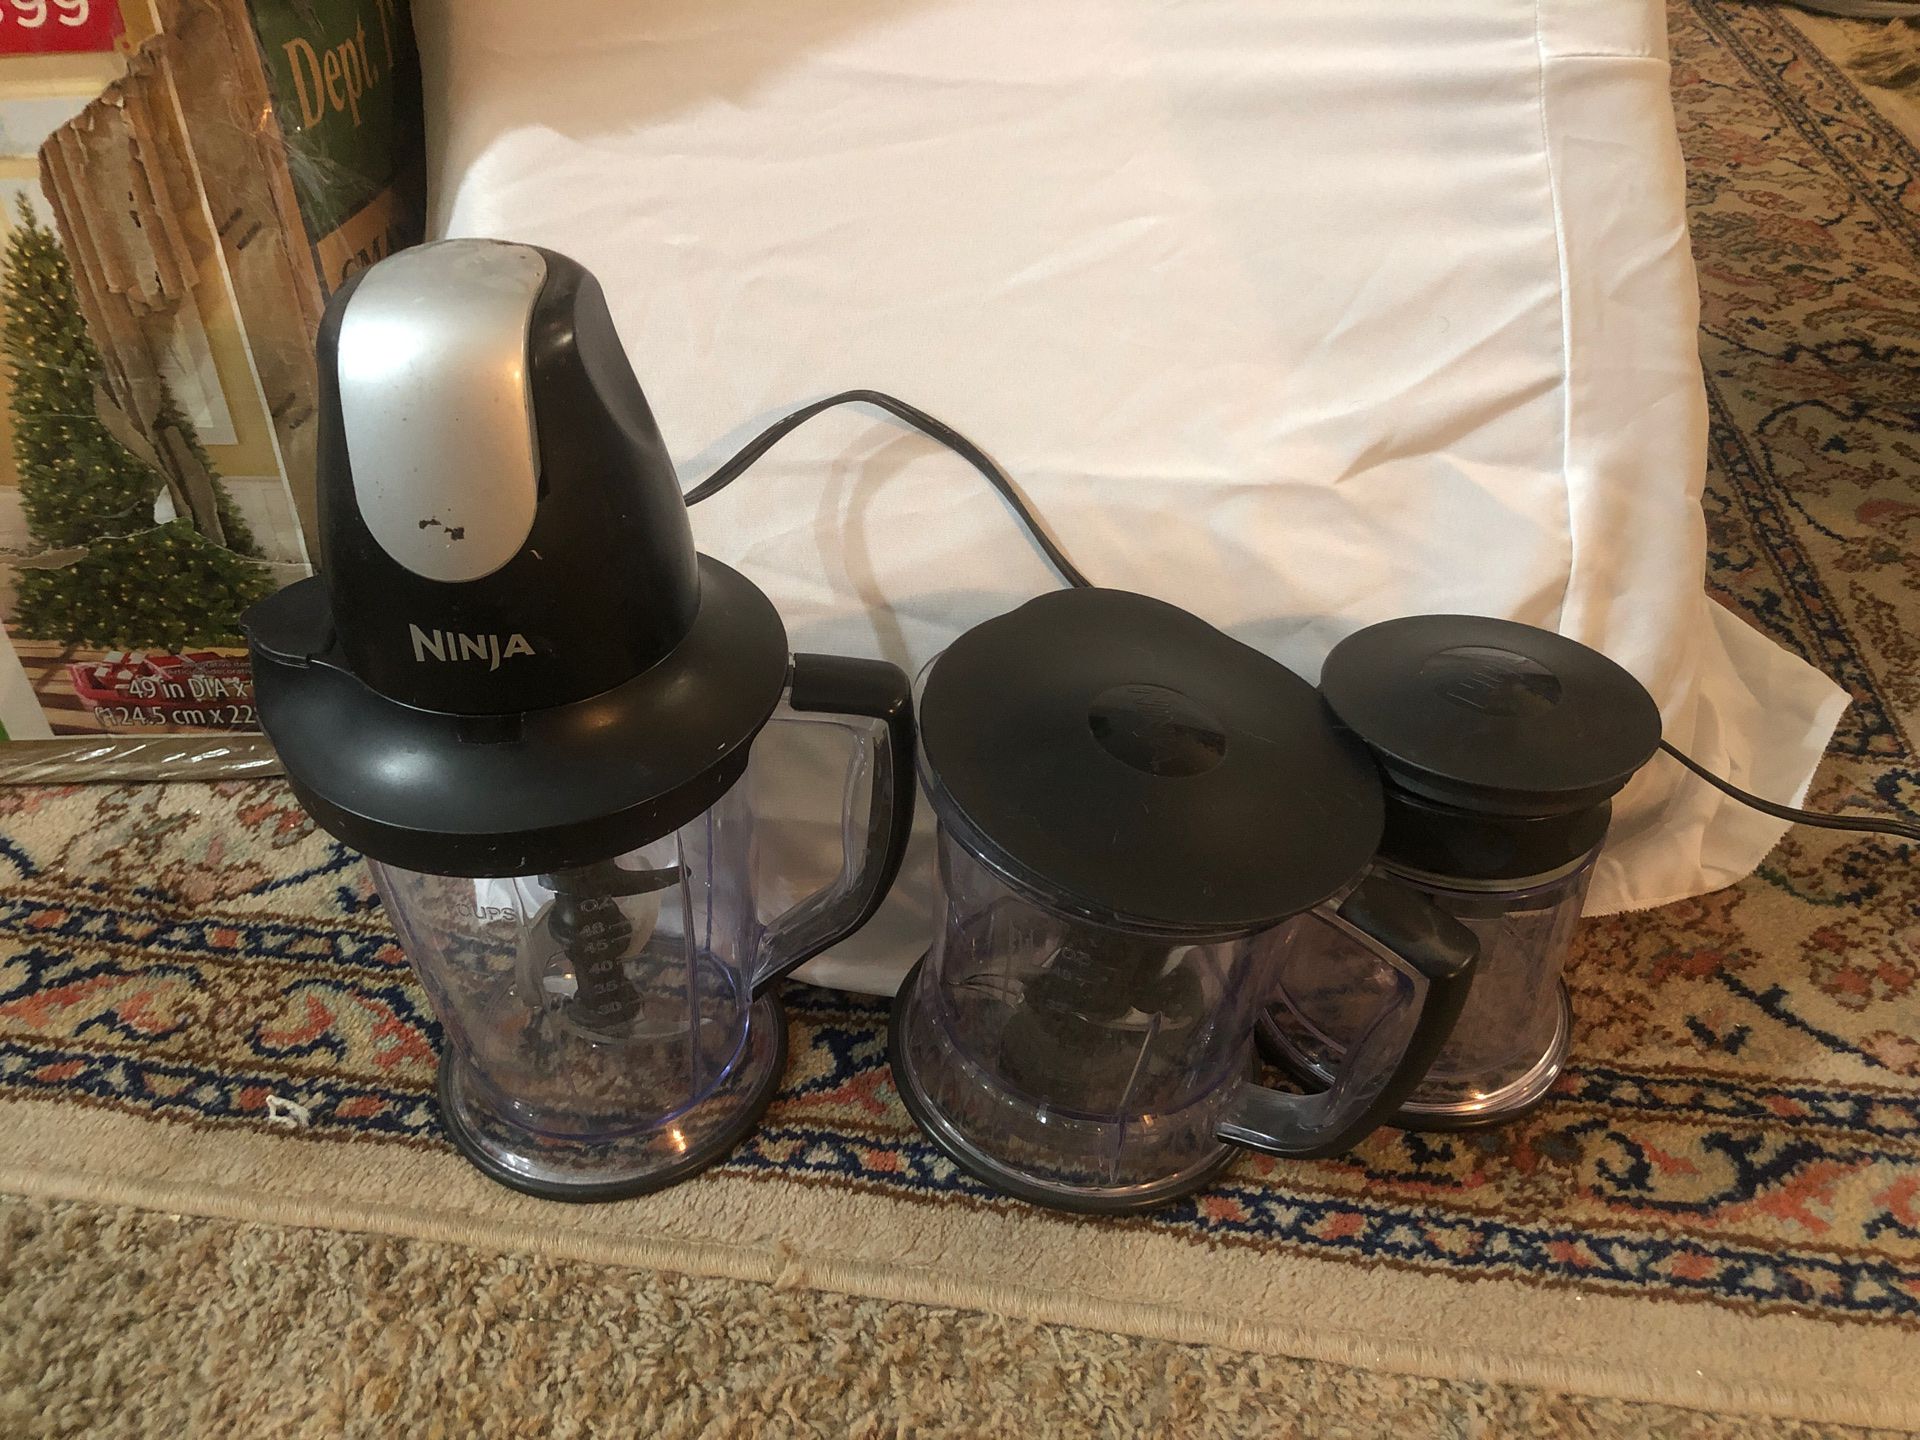 Ninja top blender with multiple blades, pitchers, and container